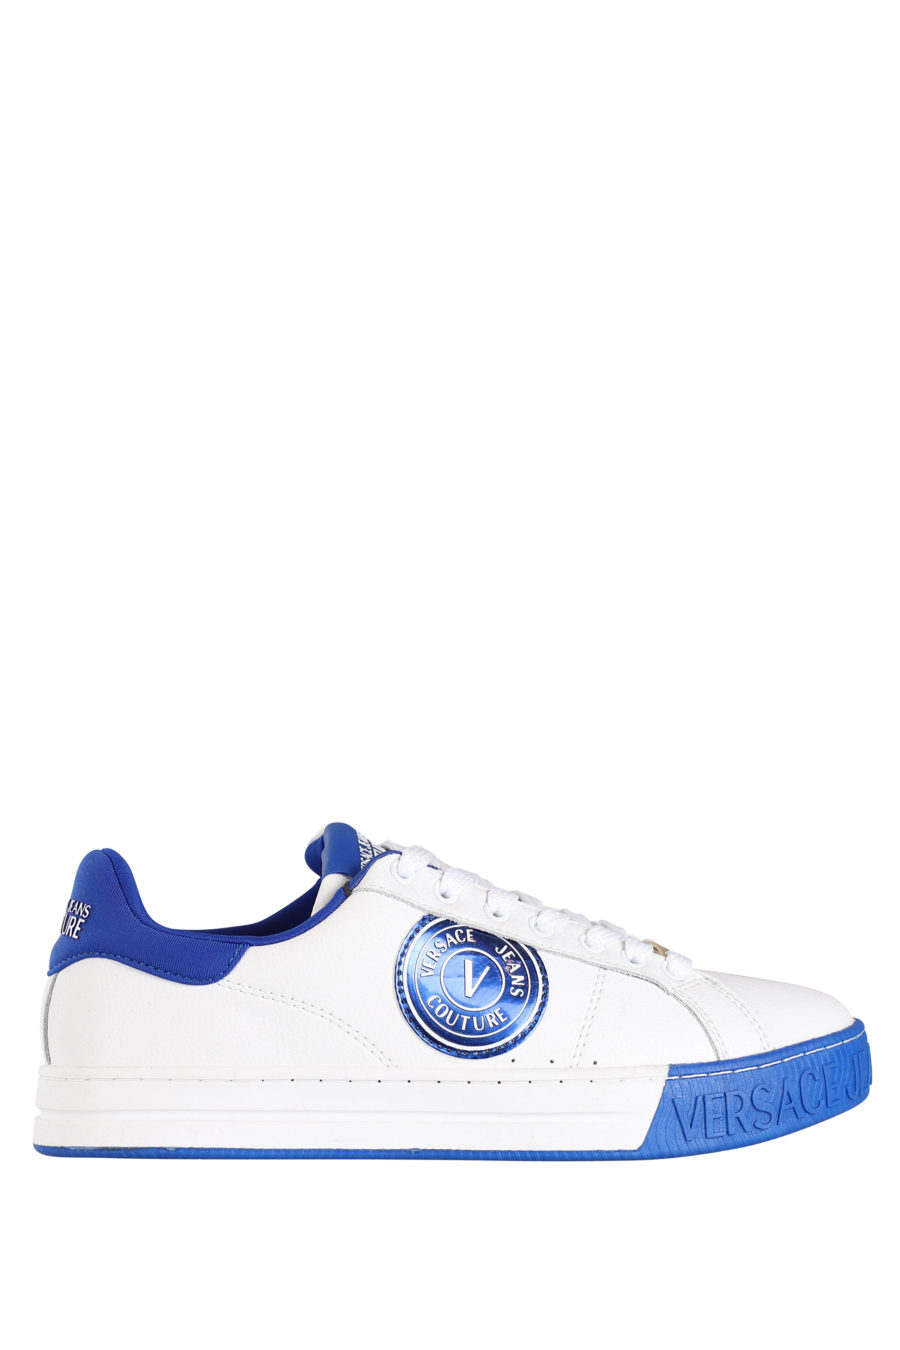 White trainers with blue details - IMG 9800